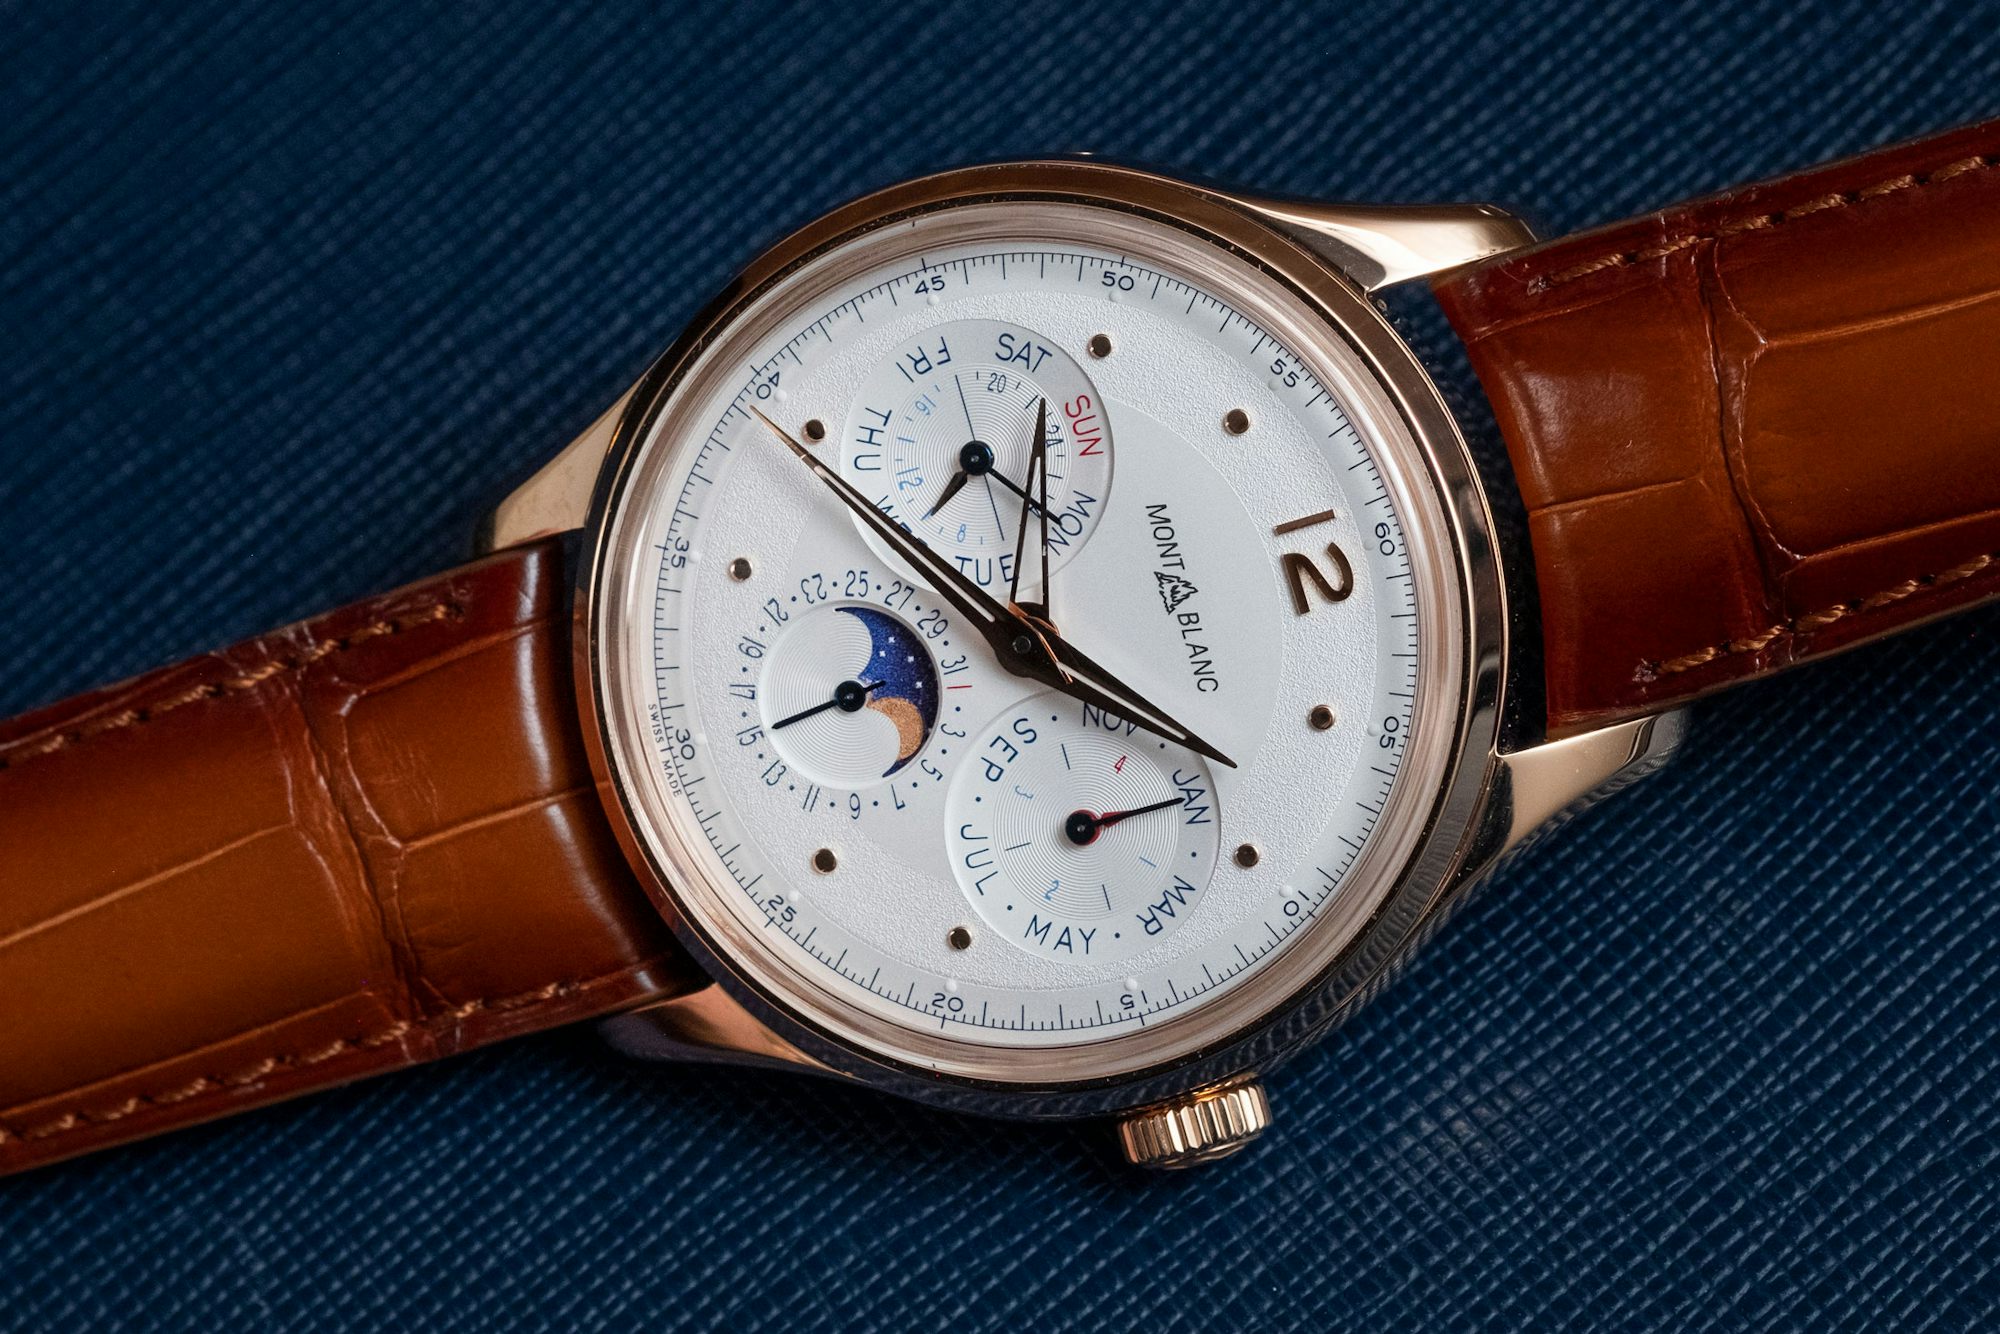 HandsOn The Montblanc Heritage Perpetual Calendar Limited Edition 100